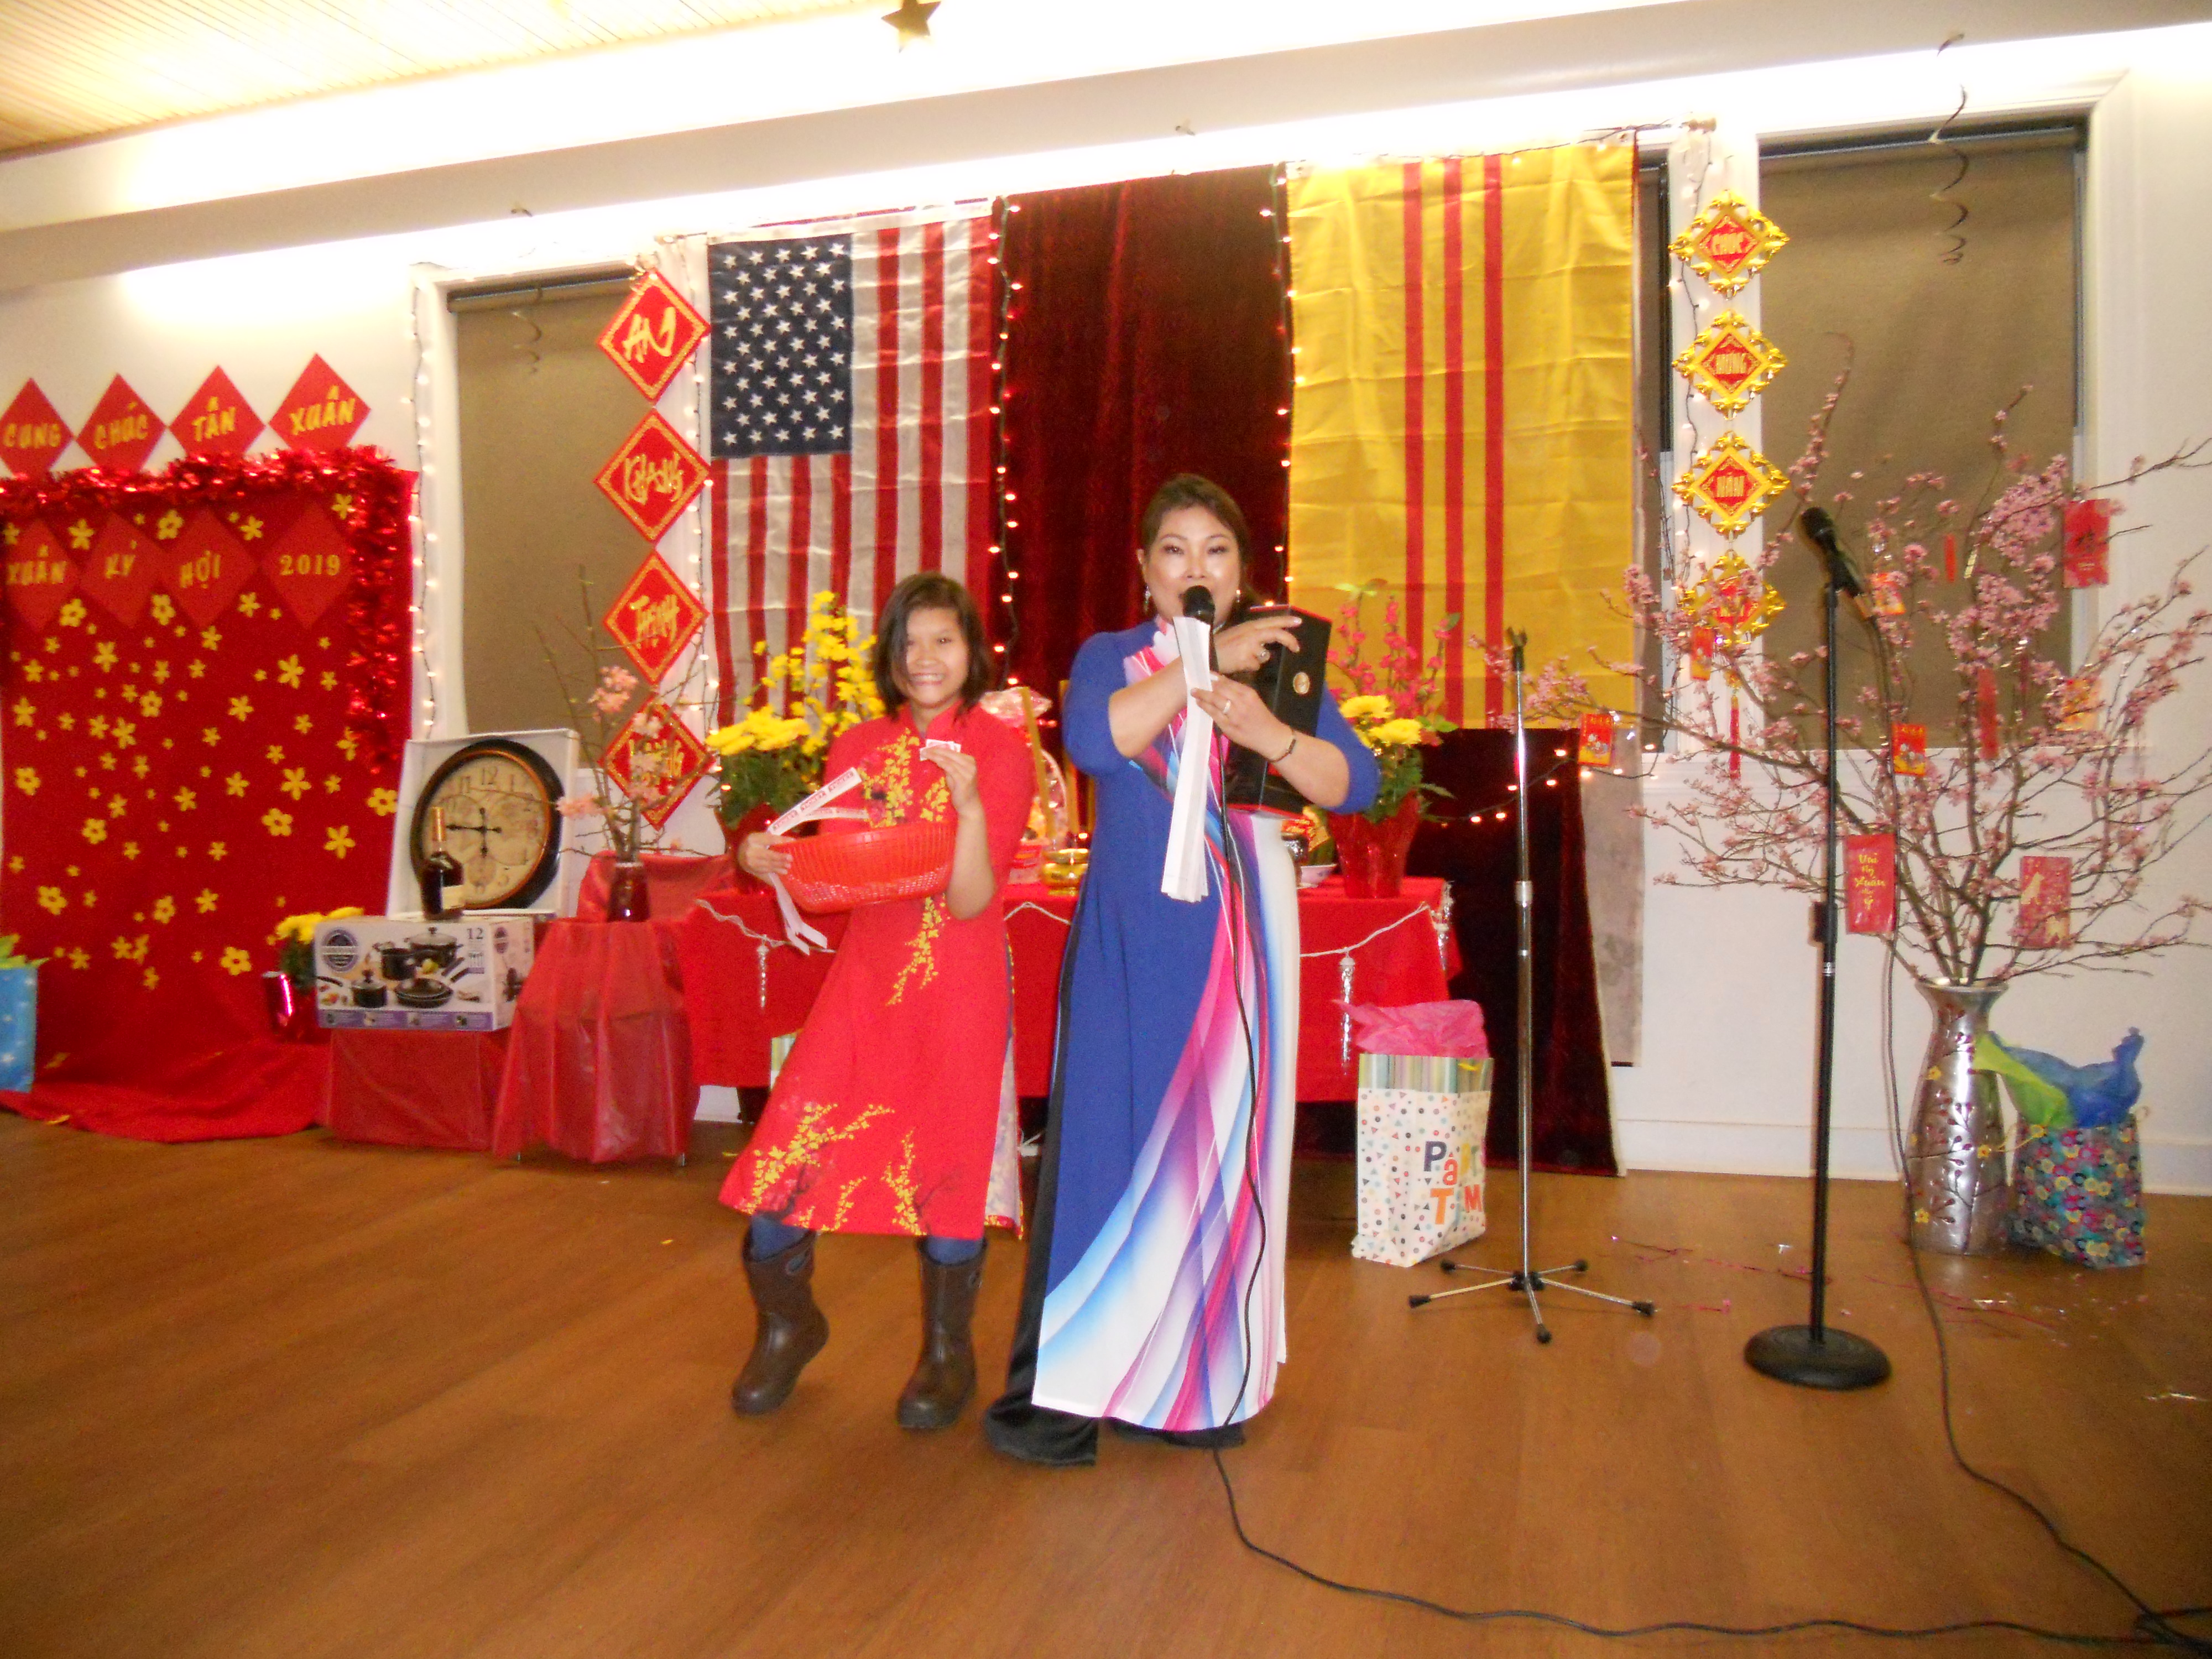 Vietnamese Moon Festival, Sunday, September 15th from 2-5 pm, New Holly Gathering Hall